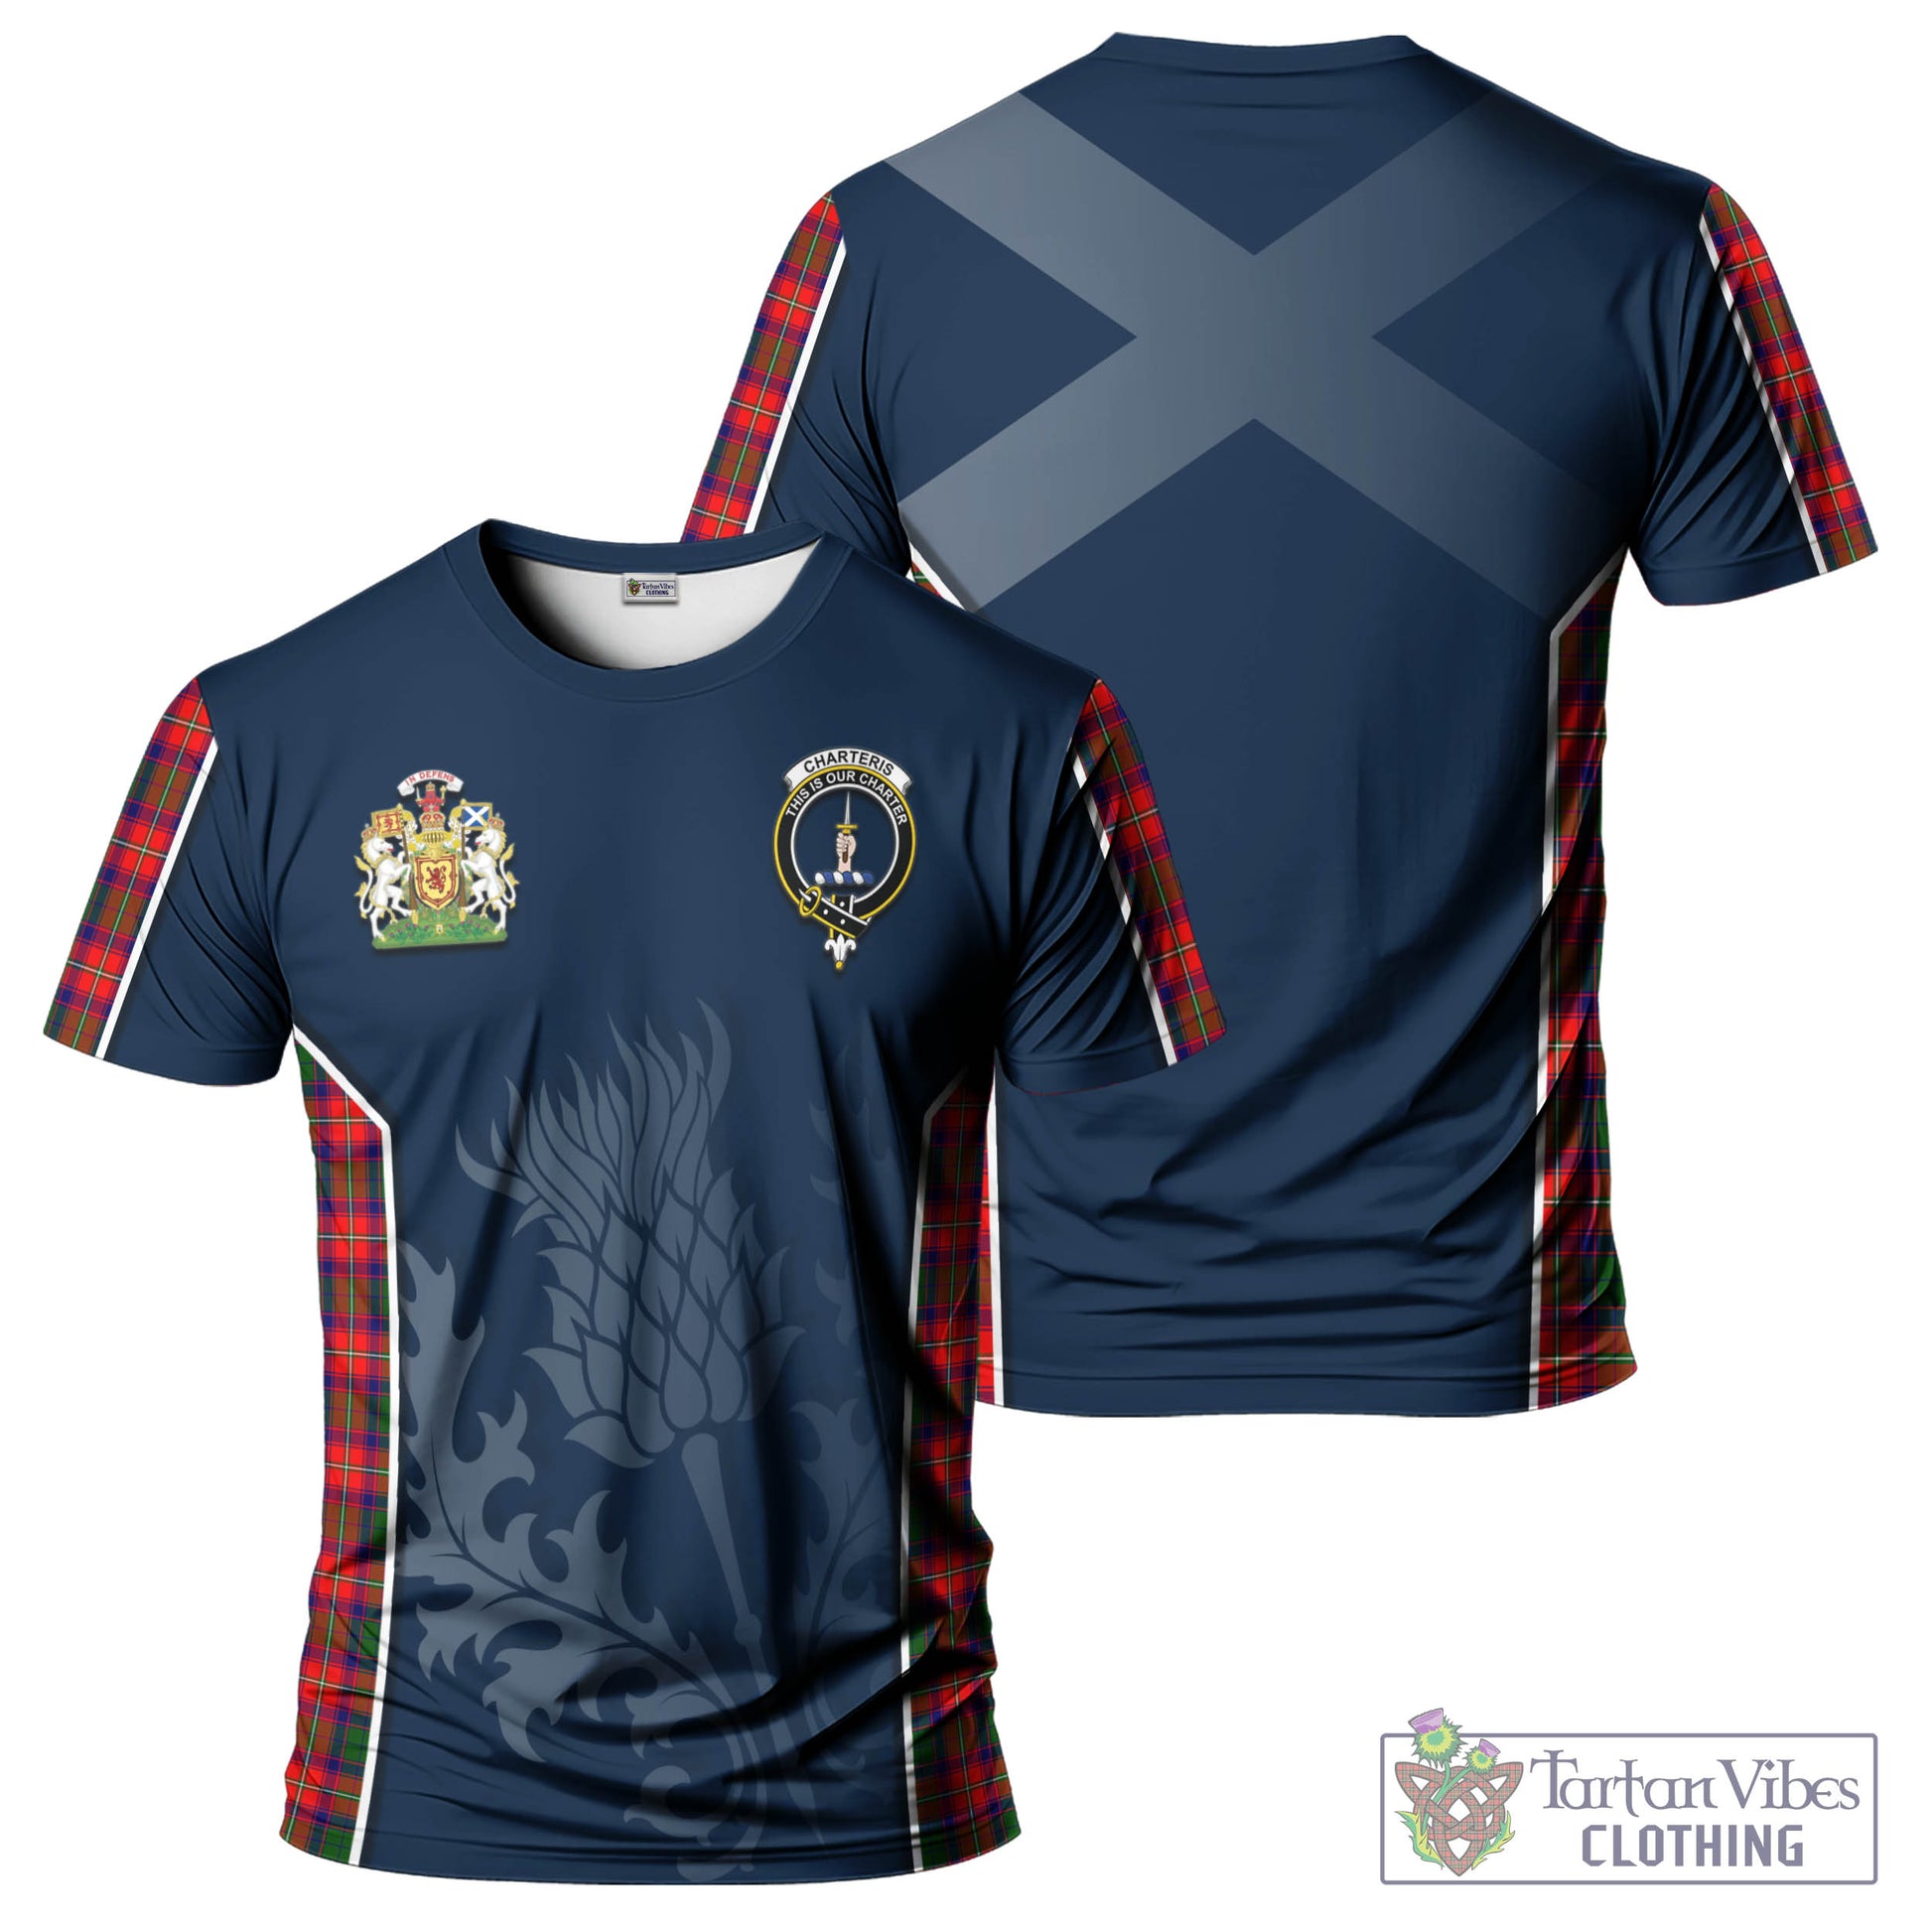 Tartan Vibes Clothing Charteris Tartan T-Shirt with Family Crest and Scottish Thistle Vibes Sport Style